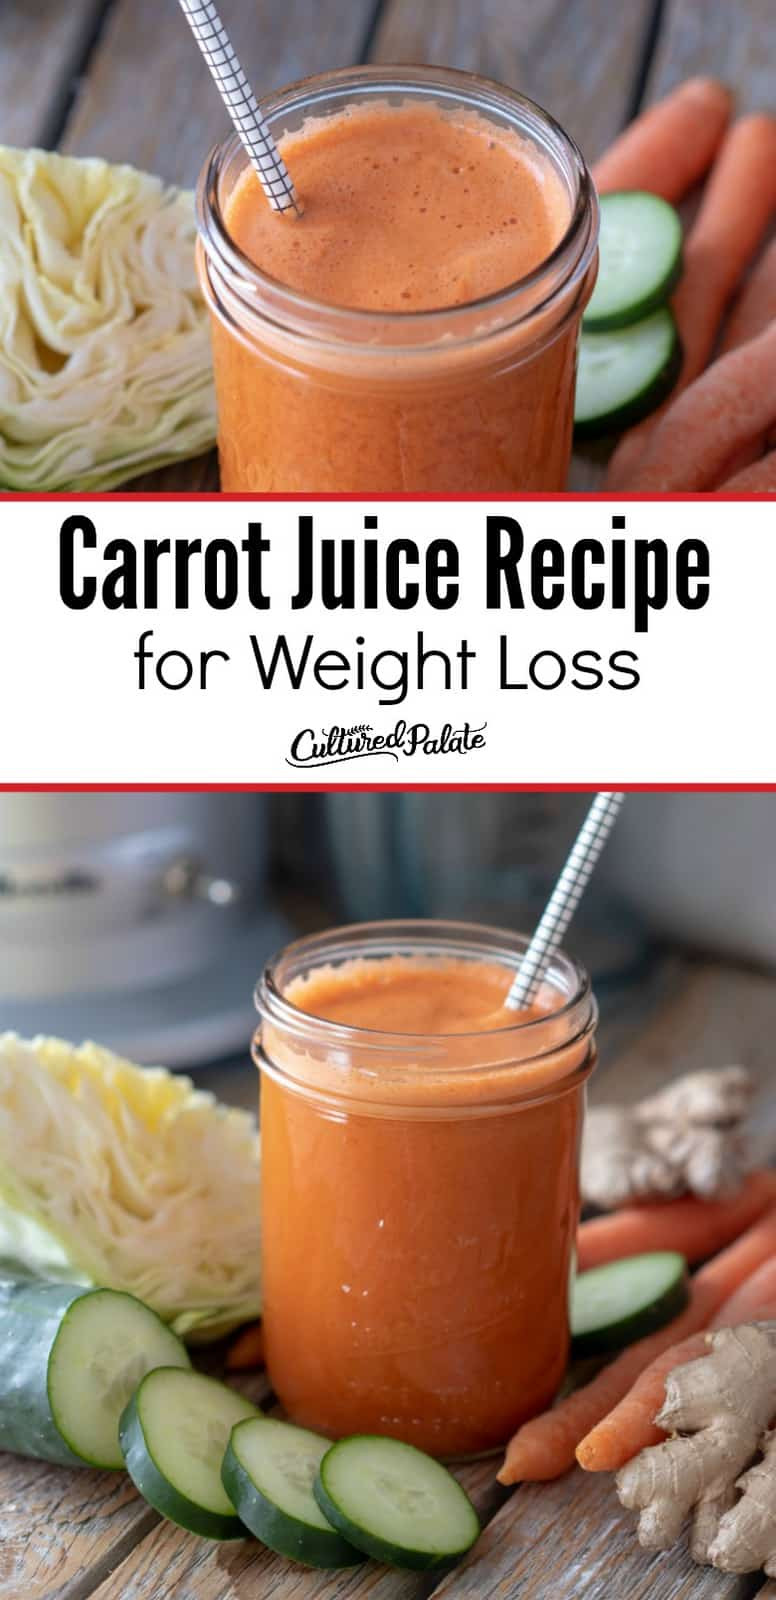 Homemade Juice Recipes For Weight Loss
 Carrot Juice Recipe for Weight Loss